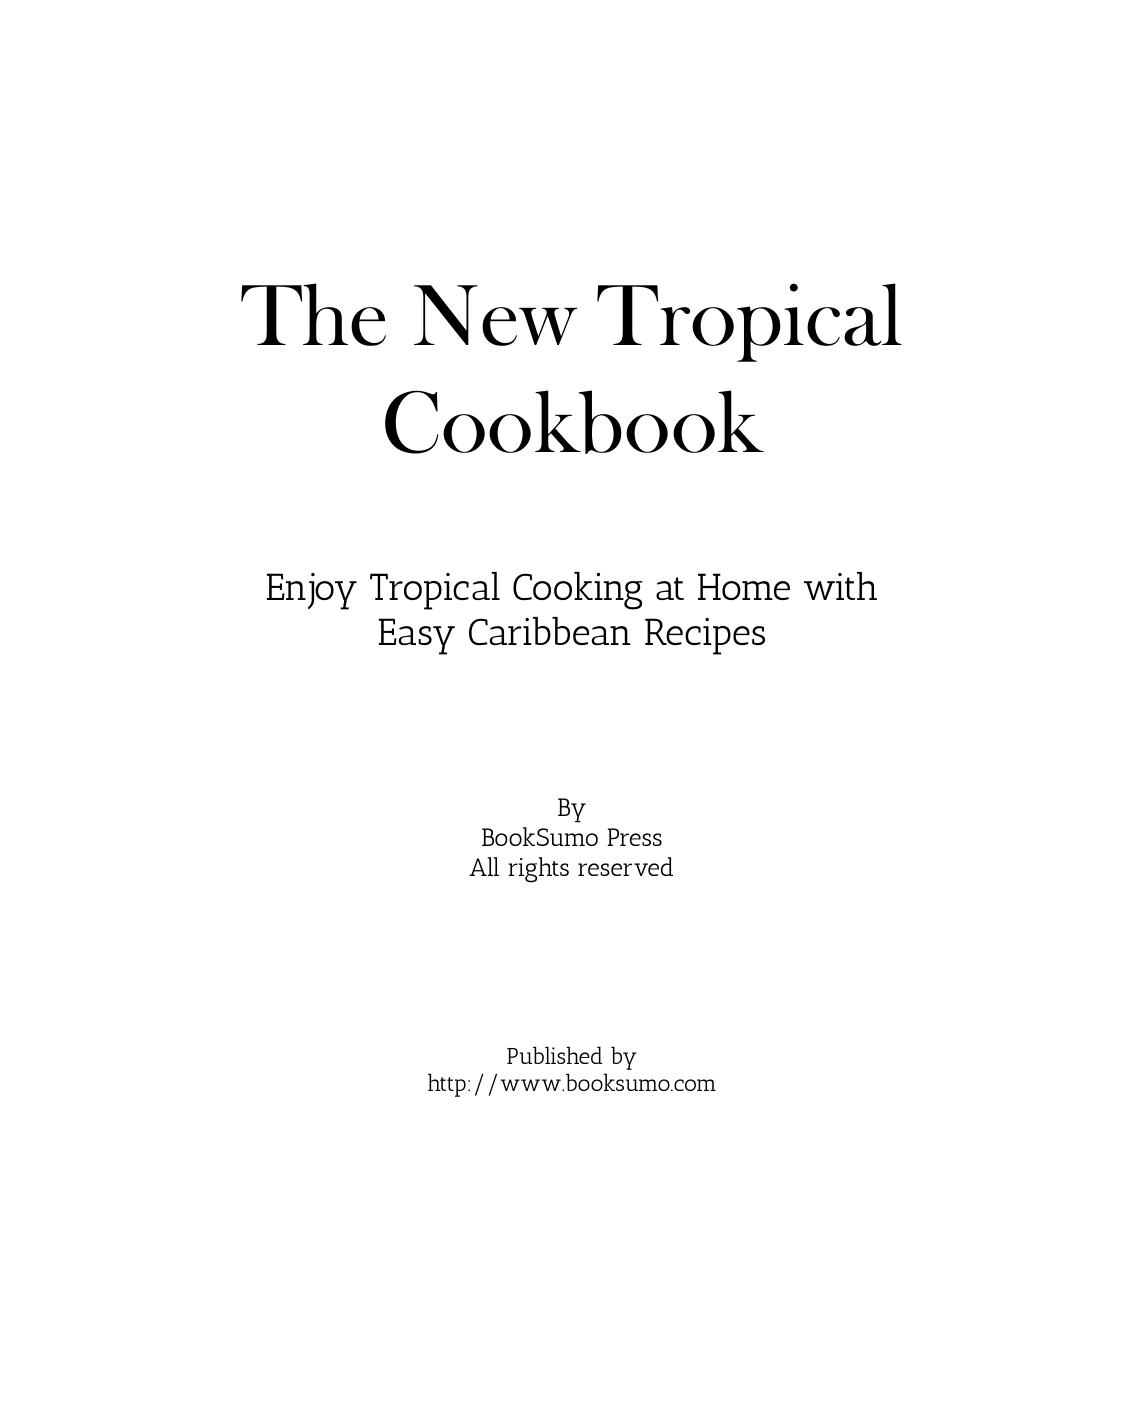 The New Tropical Cookbook: Enjoy Tropical Cooking at Home with Easy Caribbean Recipes by BookSumo Press